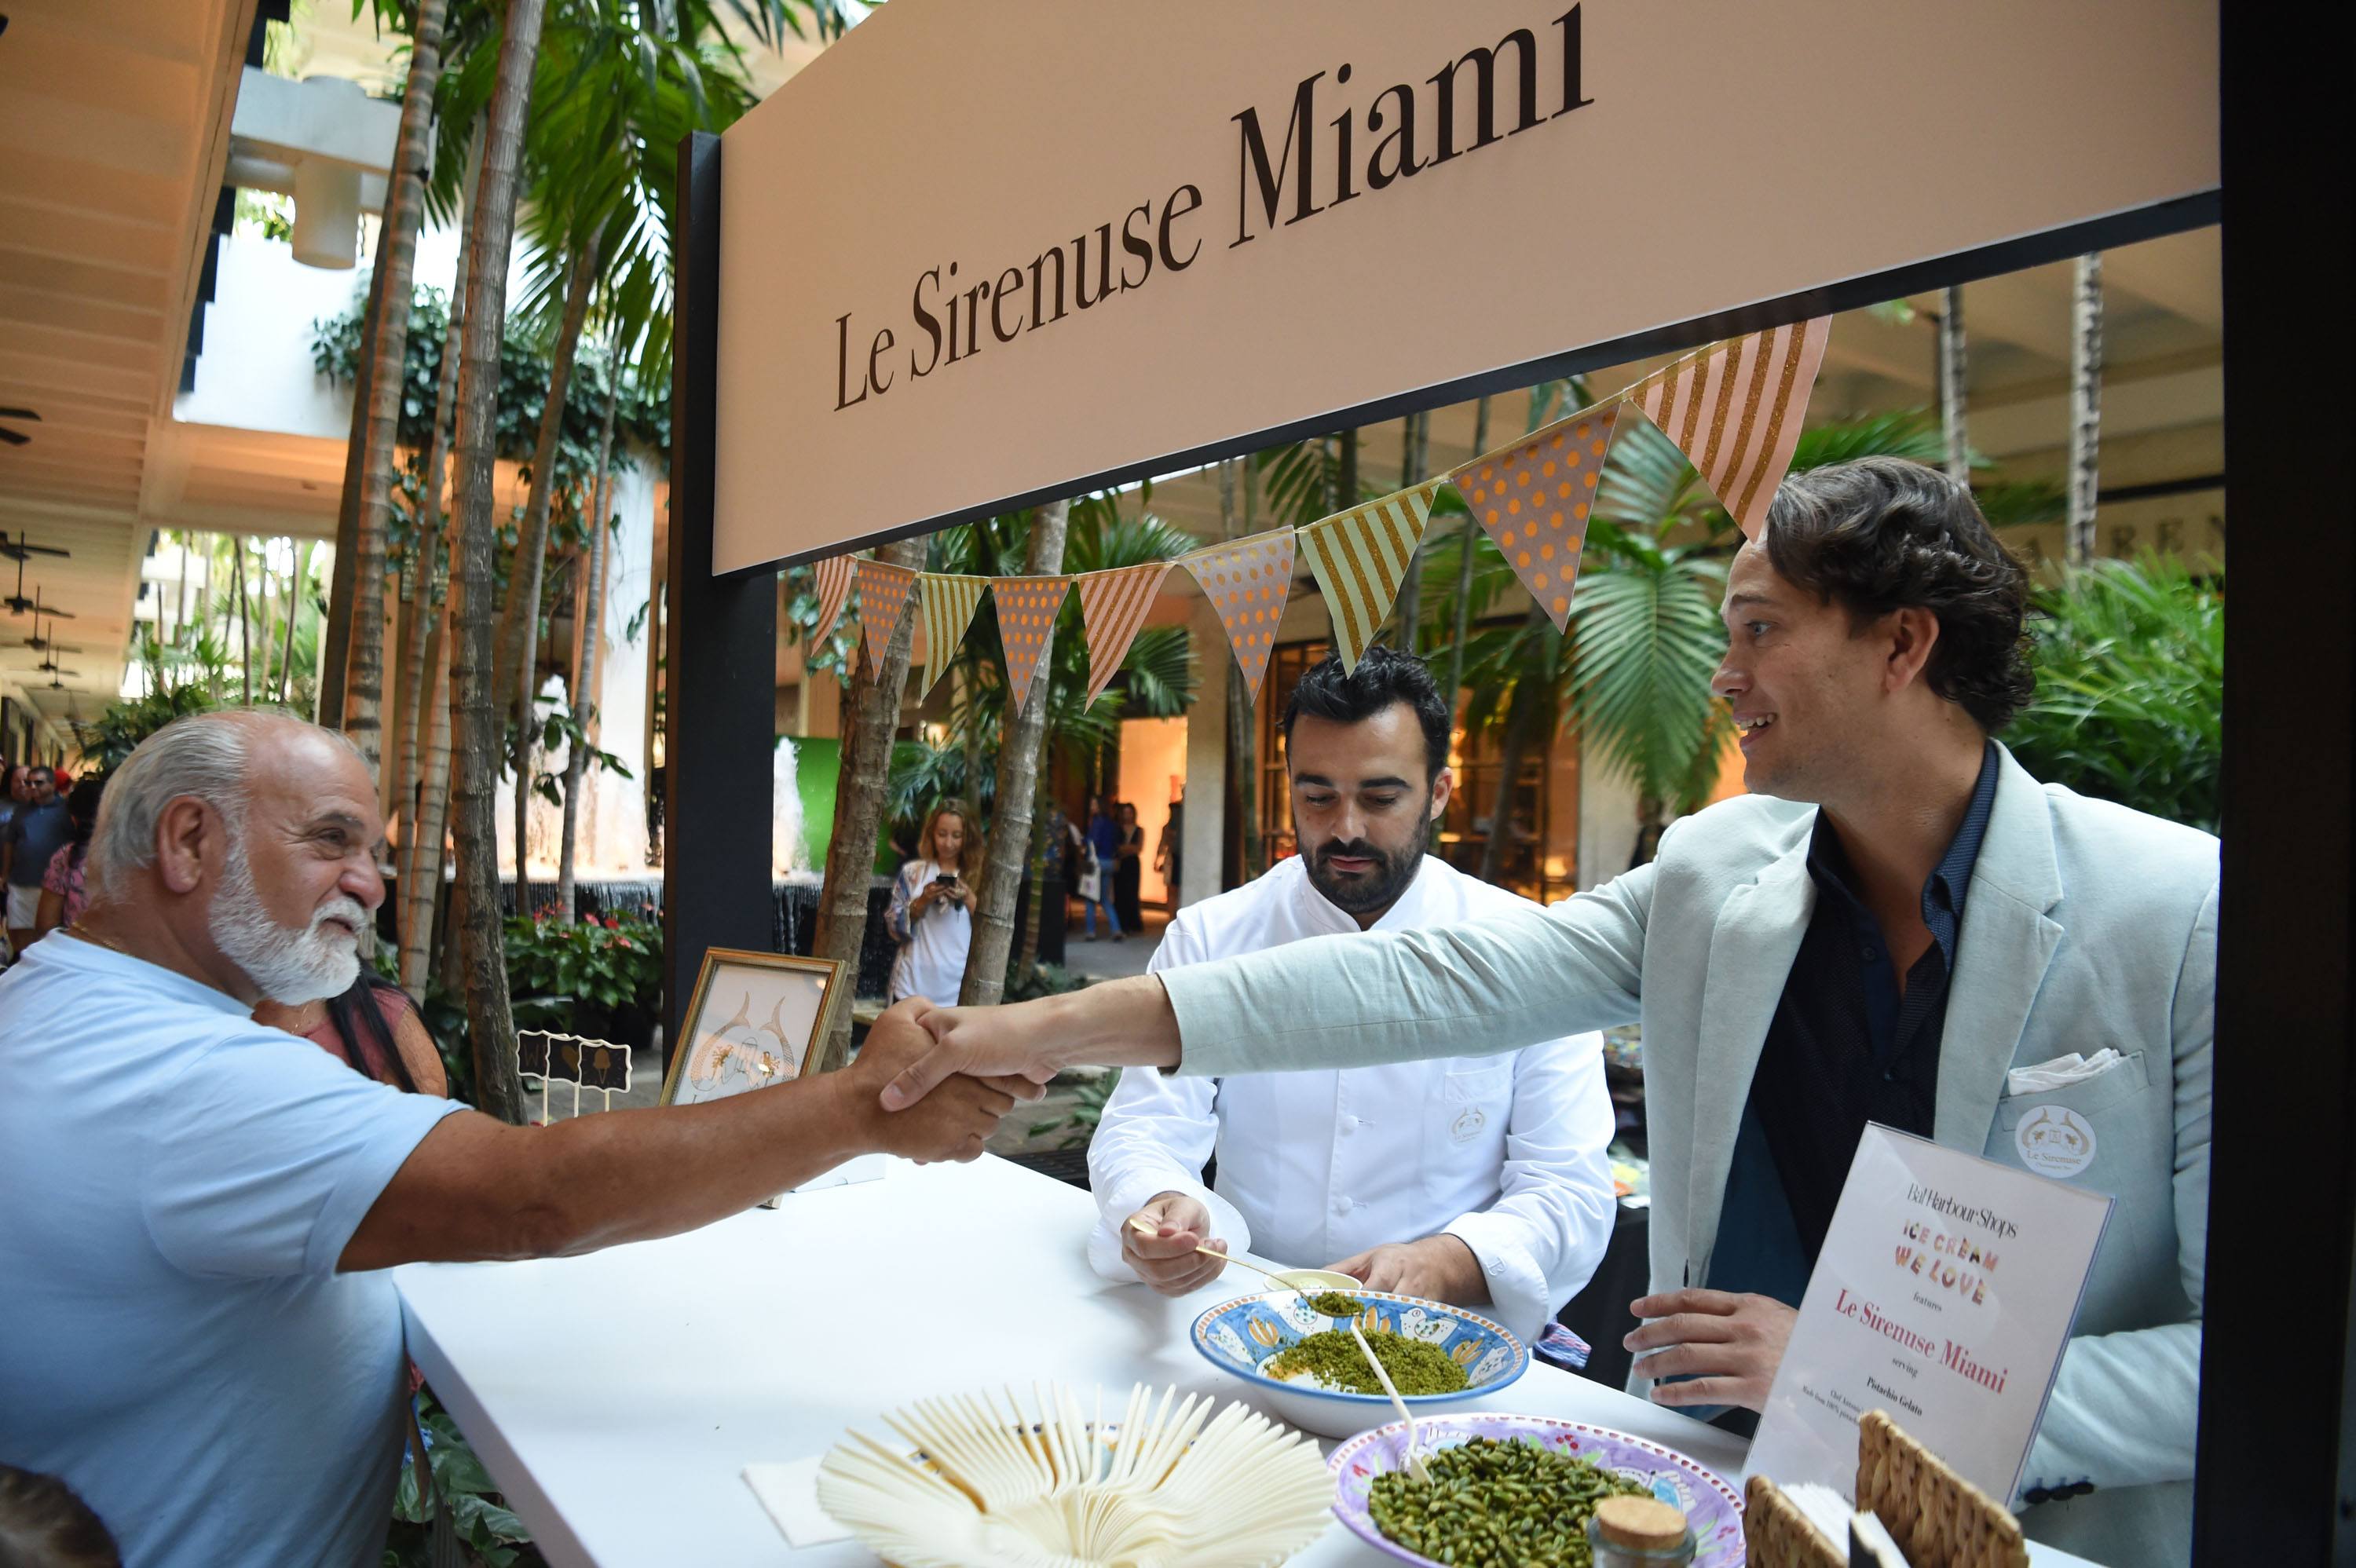 Le Sirenuse Miami served their guests their signature pistachio gelato topped with pistachio dust